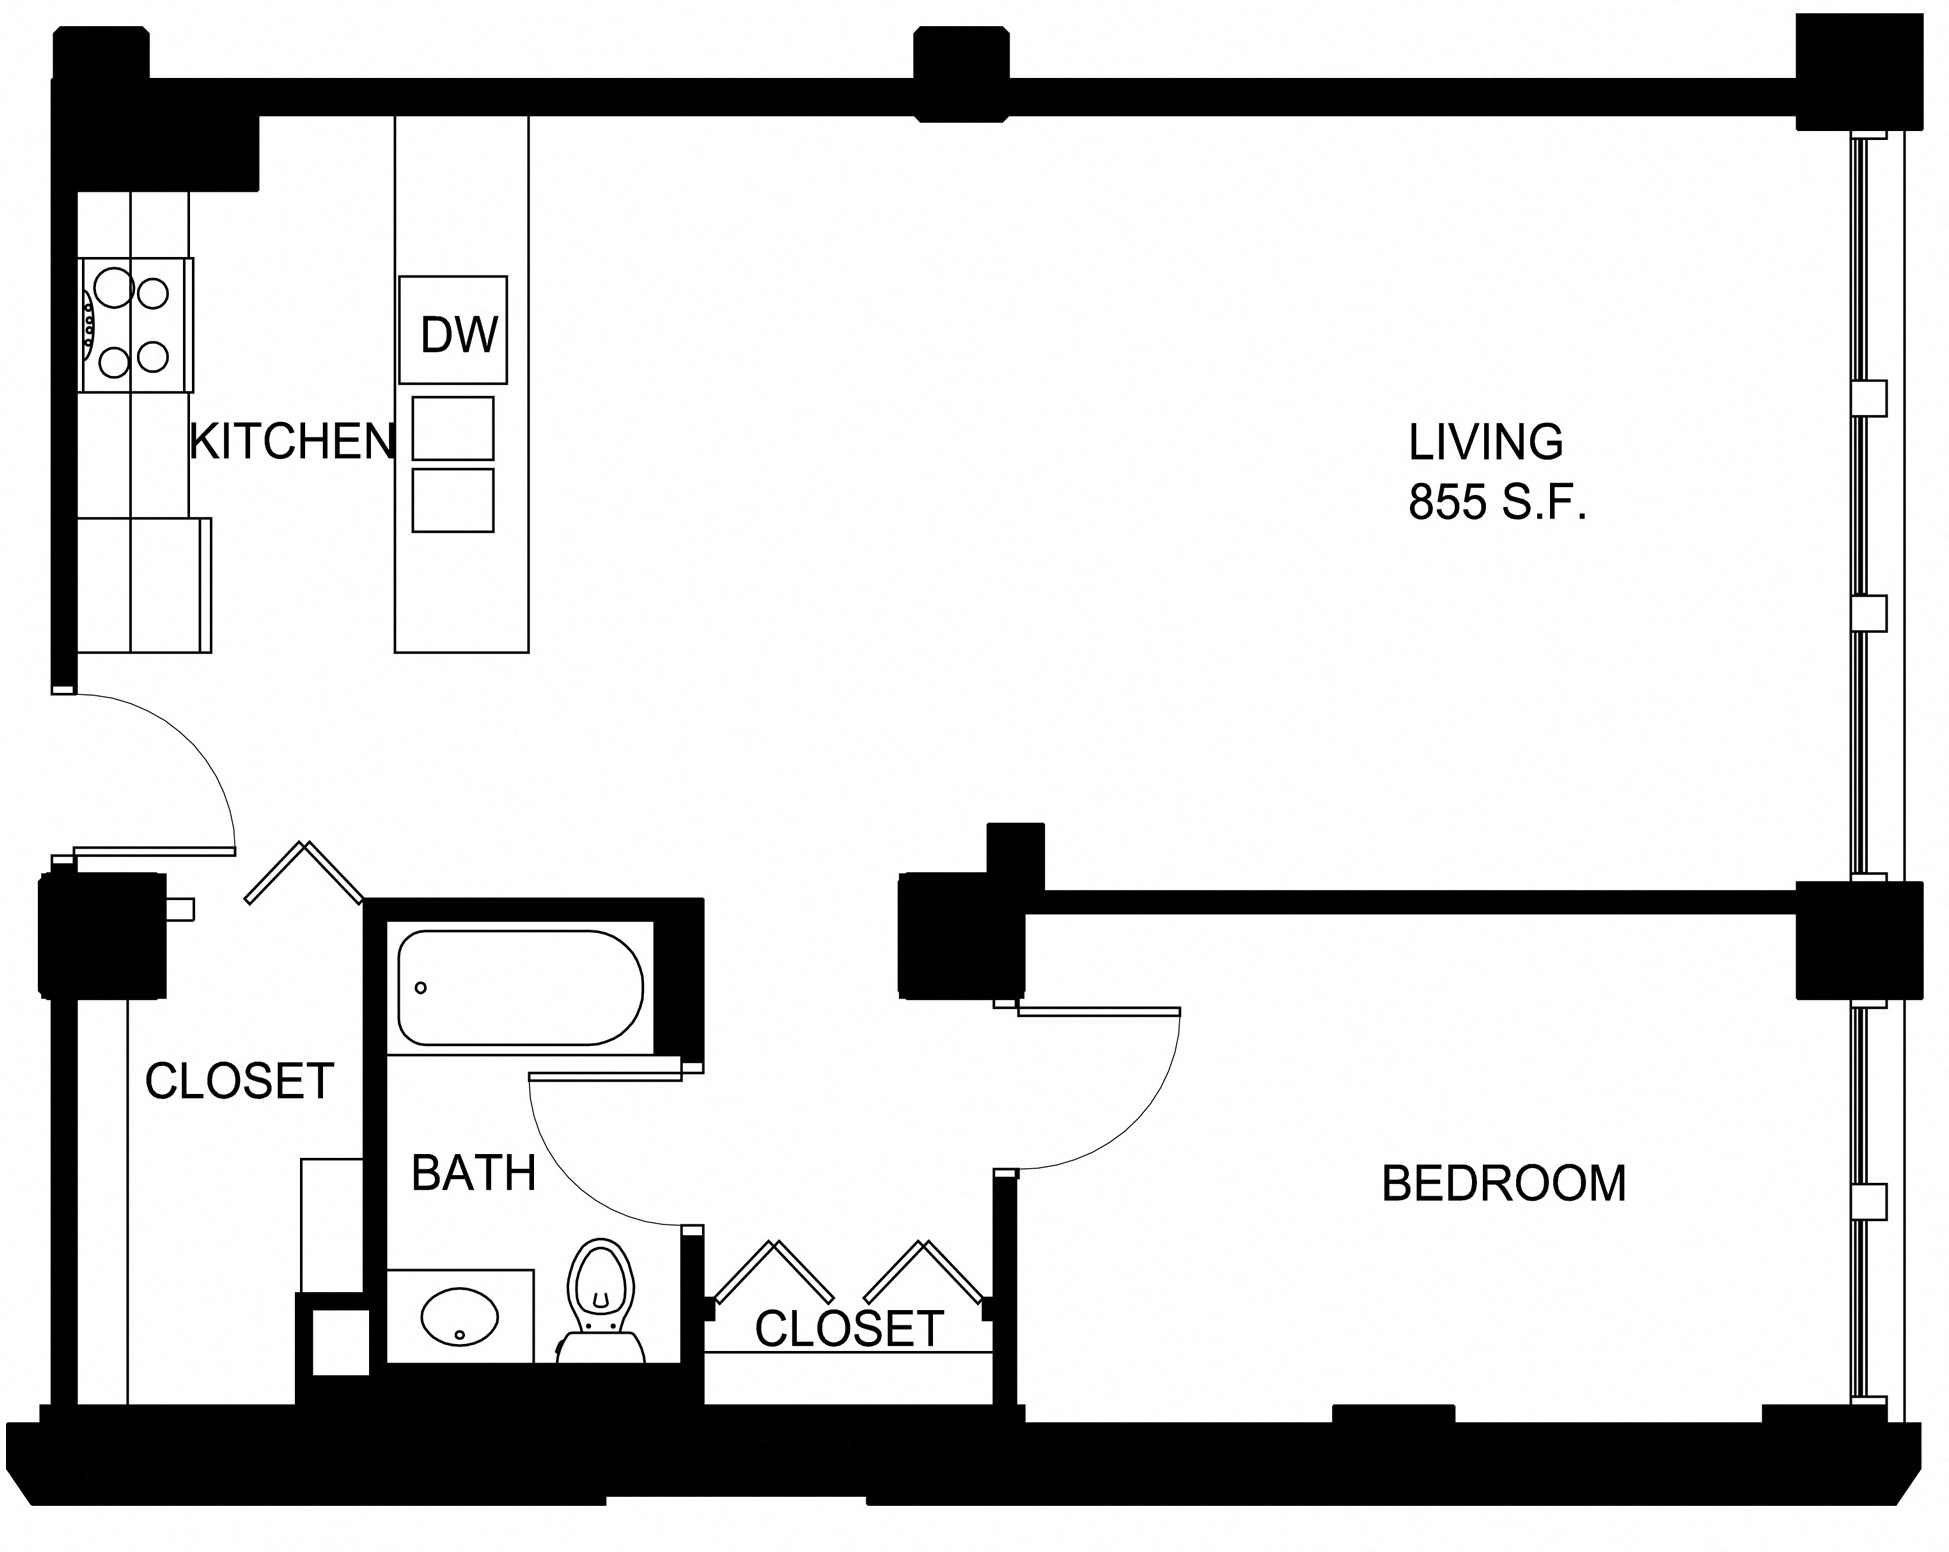 Floorplan for Apartment #P256, 1 bedroom unit at Halstead Providence